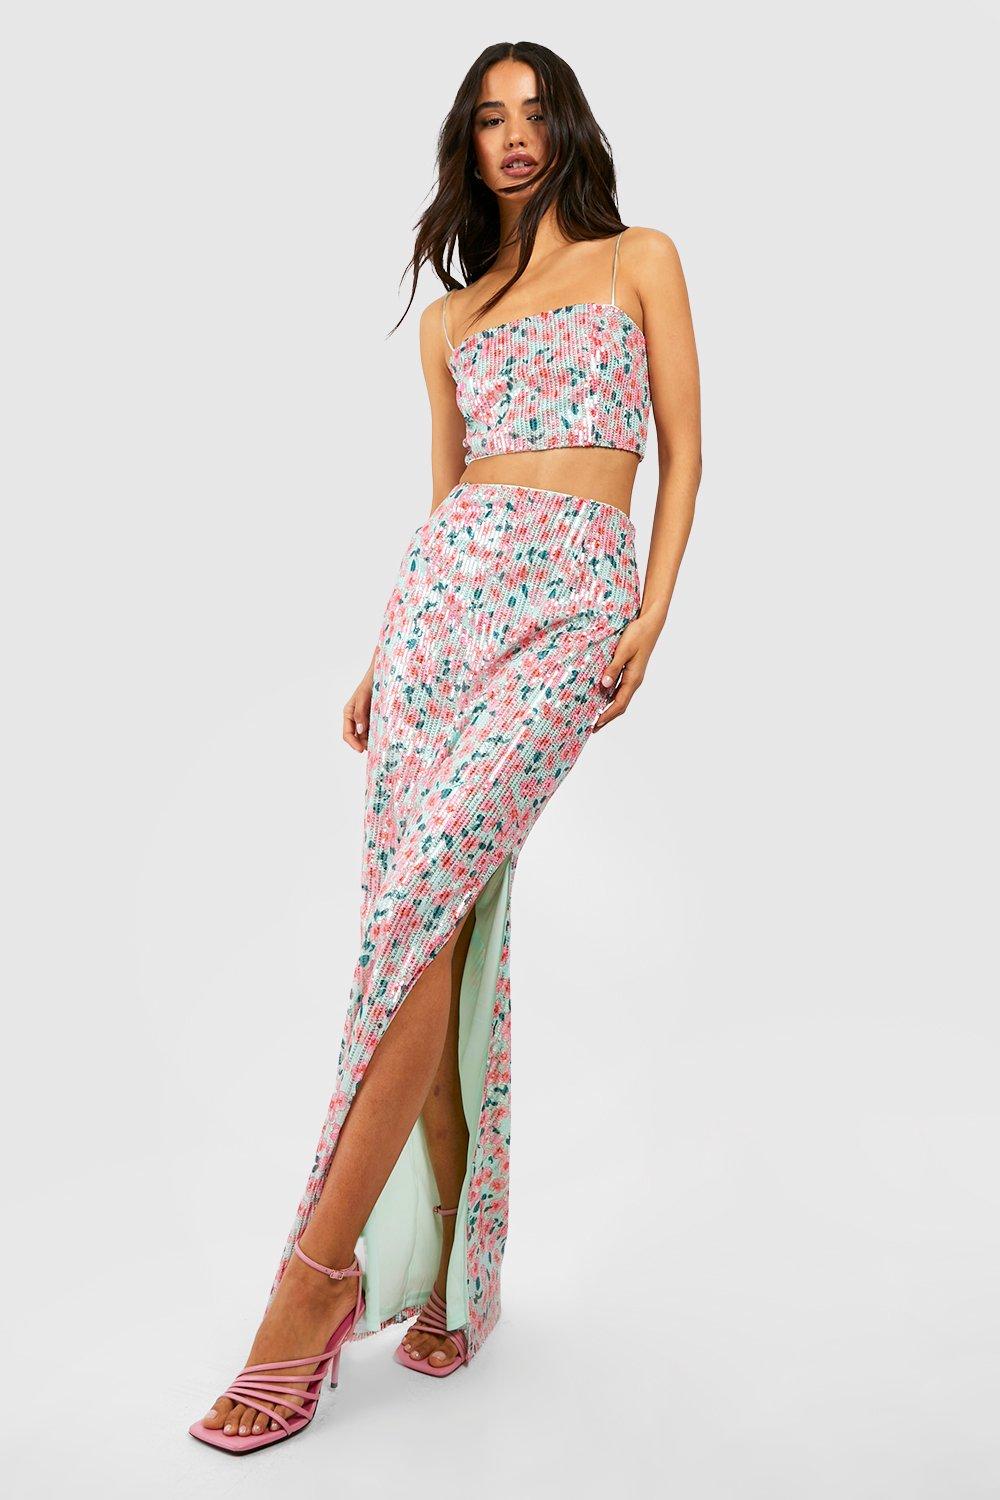 https://media.boohoo.com/i/boohoo/gzz47105_pink_xl_2/female-pink-floral-sequin-square-neck-cropped-cami